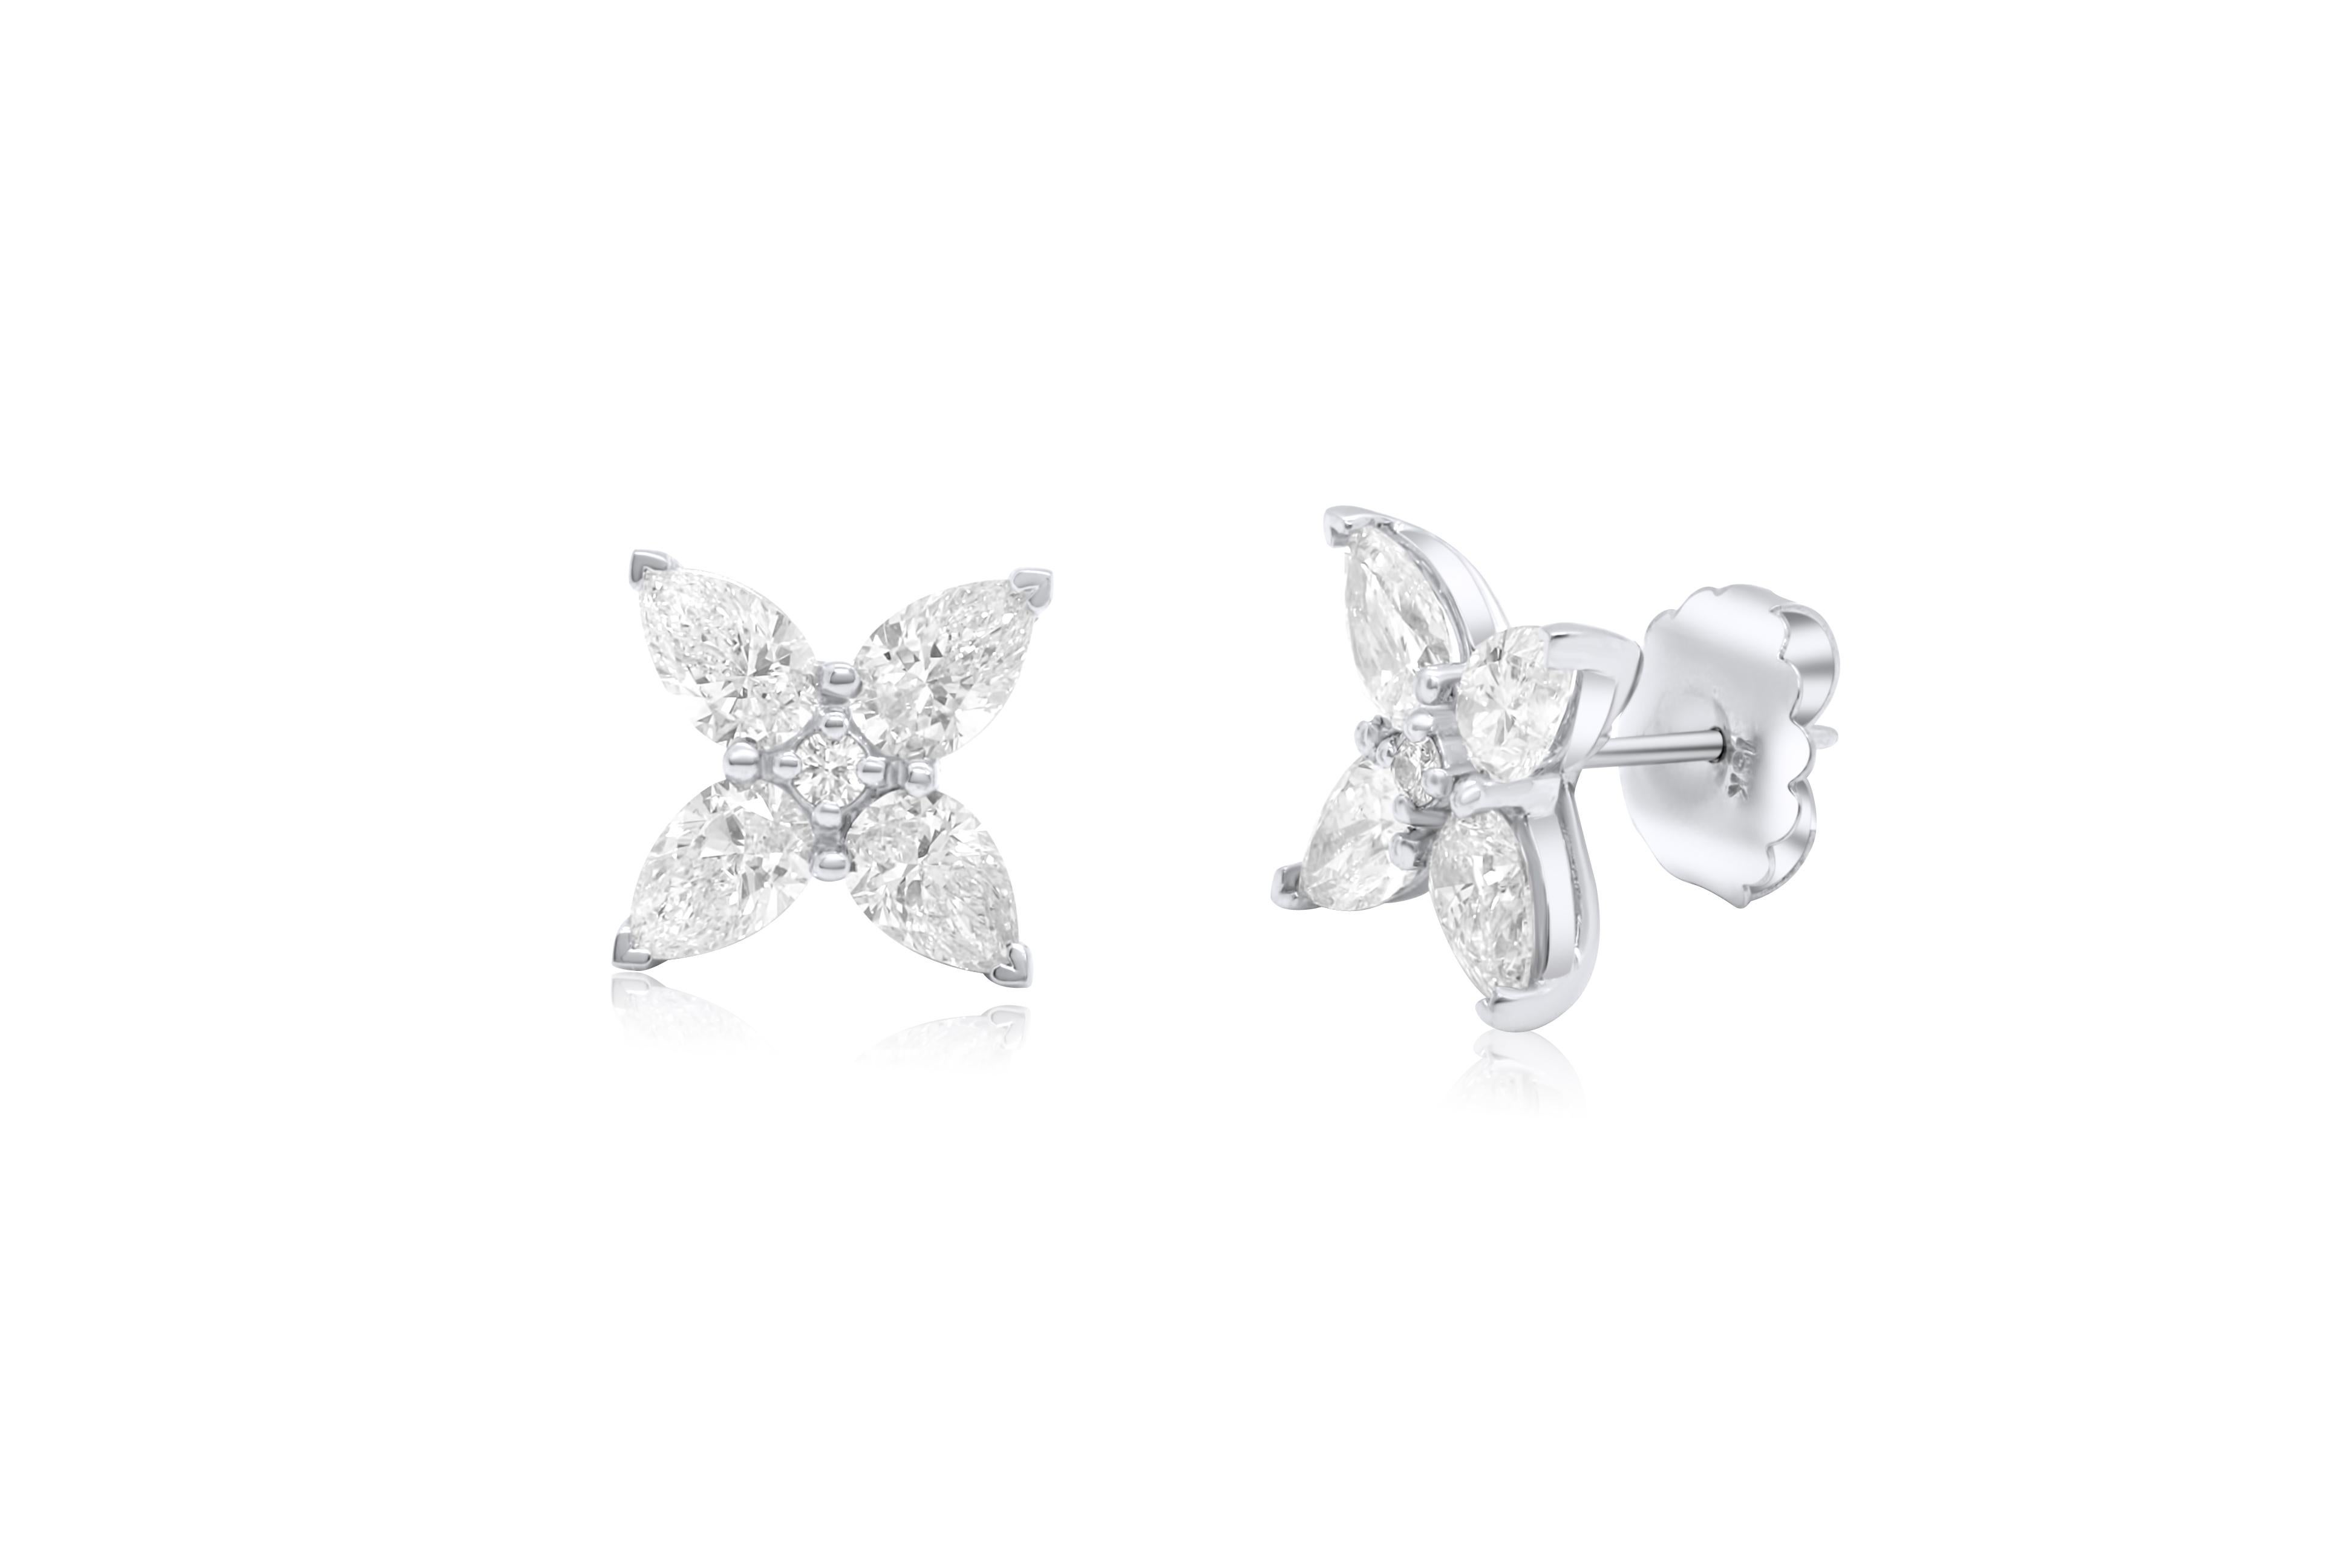 PLATINUM EARRING STUDS WITH PEAR SHAPE DIAMONDS 4.09CTS GHJ, SI1-SI2 8 STONES GIA REPORTS RD 2 STONES 0.09CTS. Total earring weight
 Diana M is one-stop shop for all your jewelry shopping, carrying line of diamond rings, earrings, bracelets,